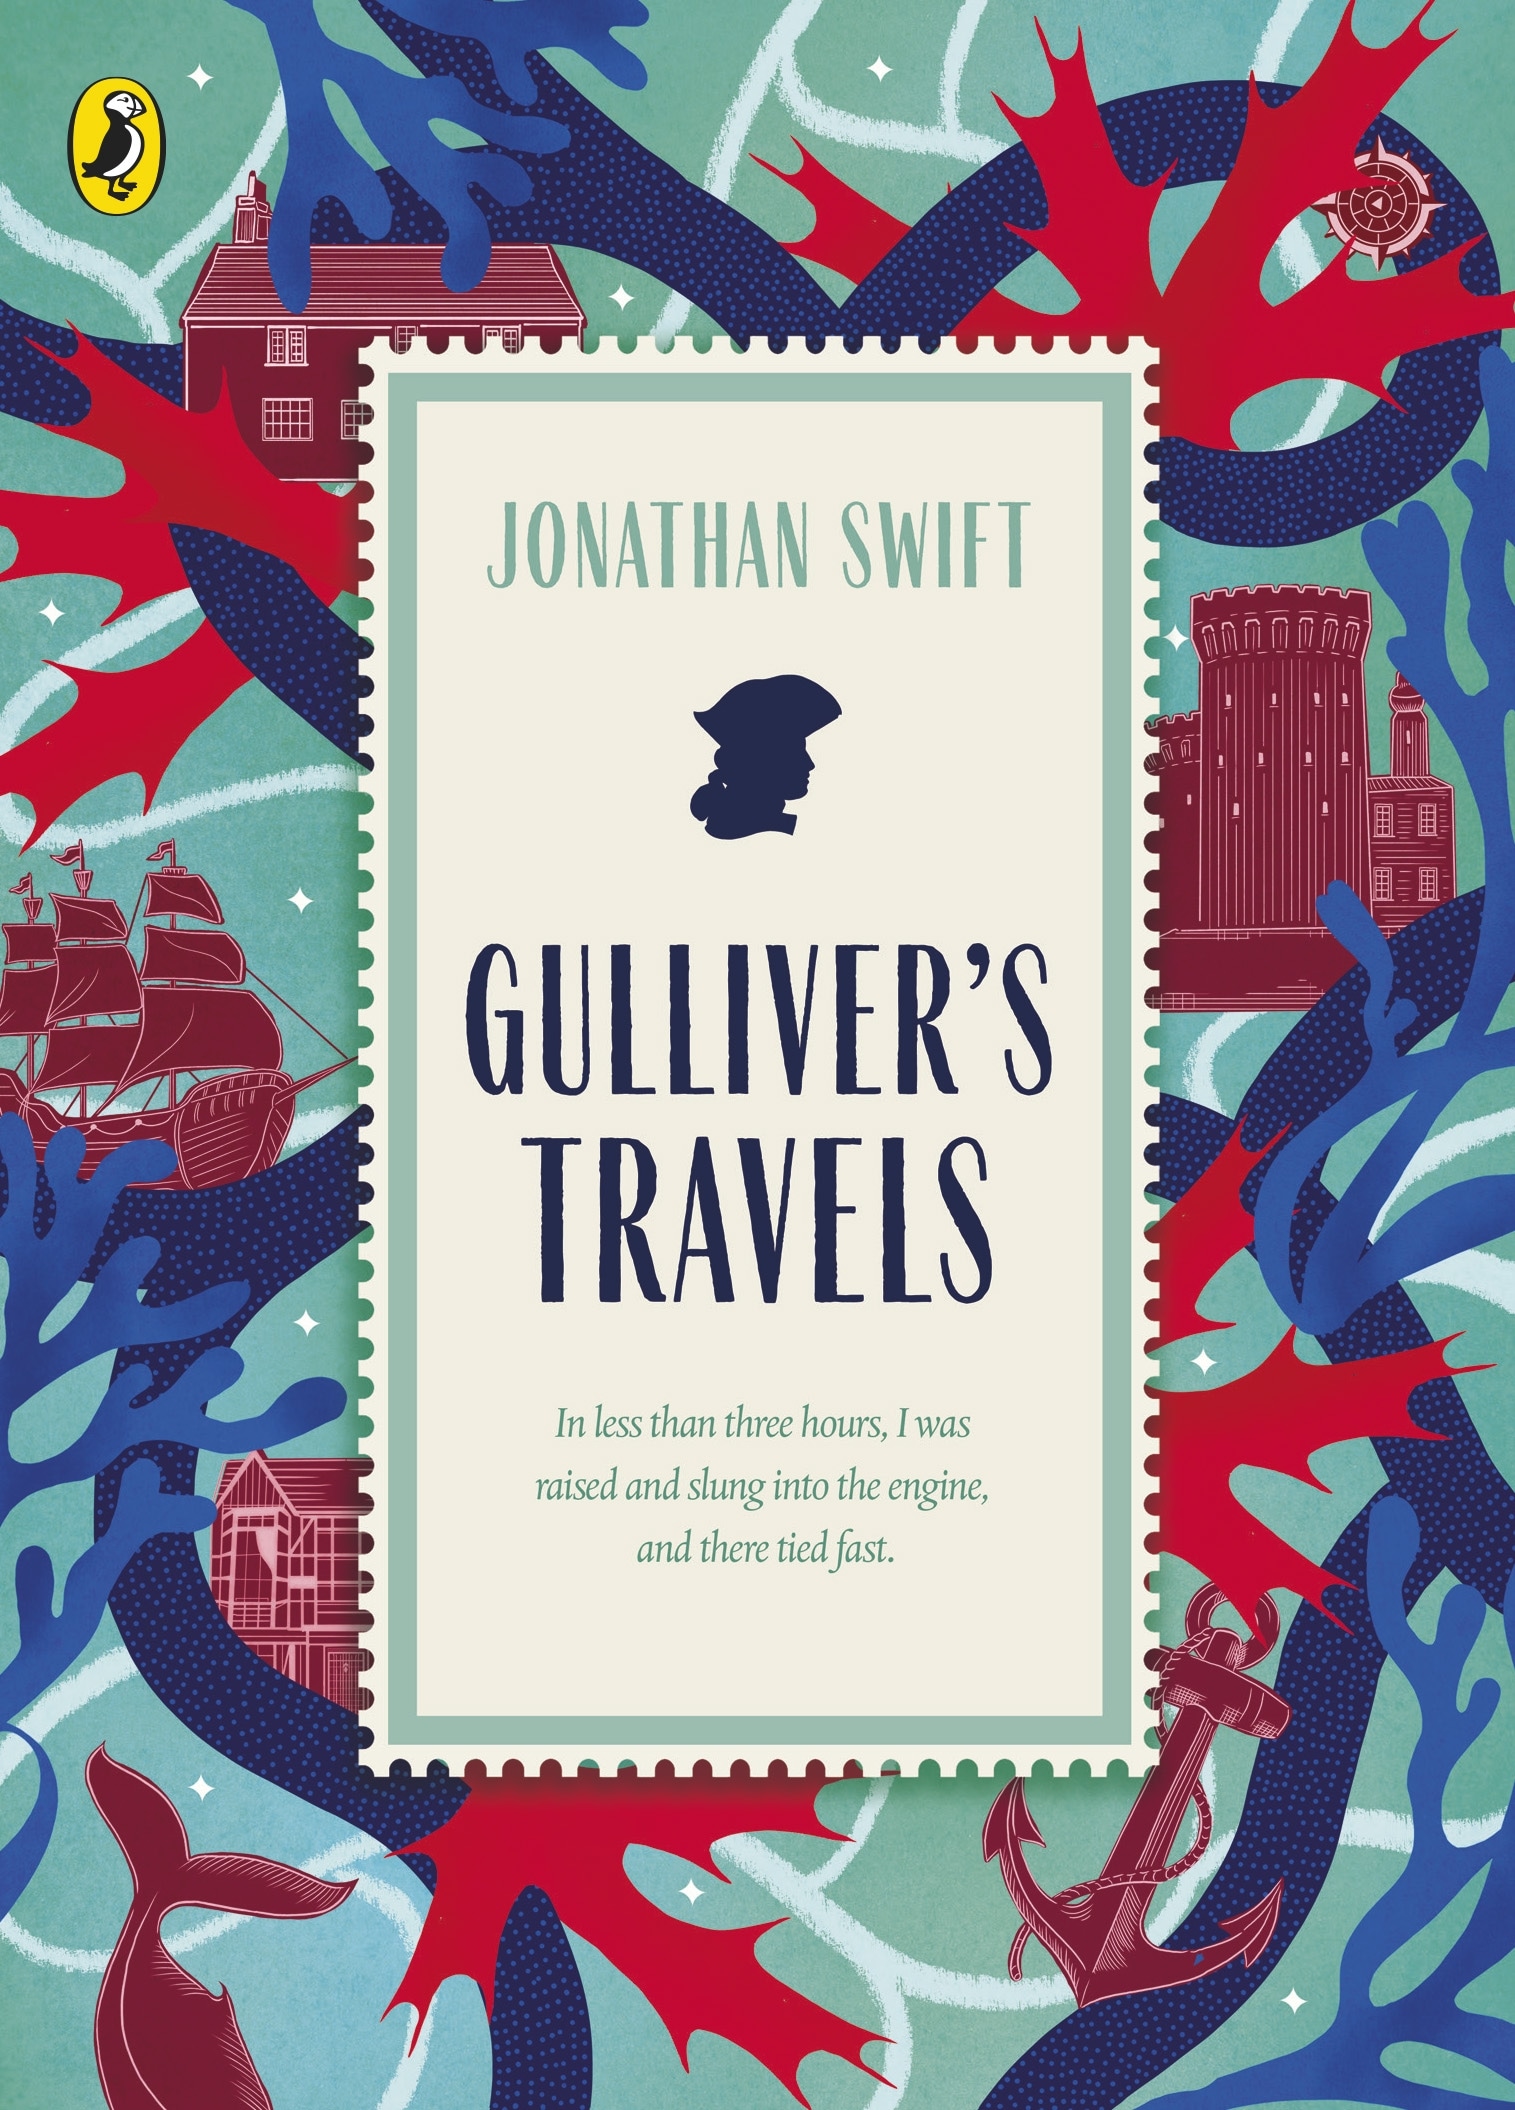 Book “Gulliver's Travels” by Jonathan Swift — January 7, 2021